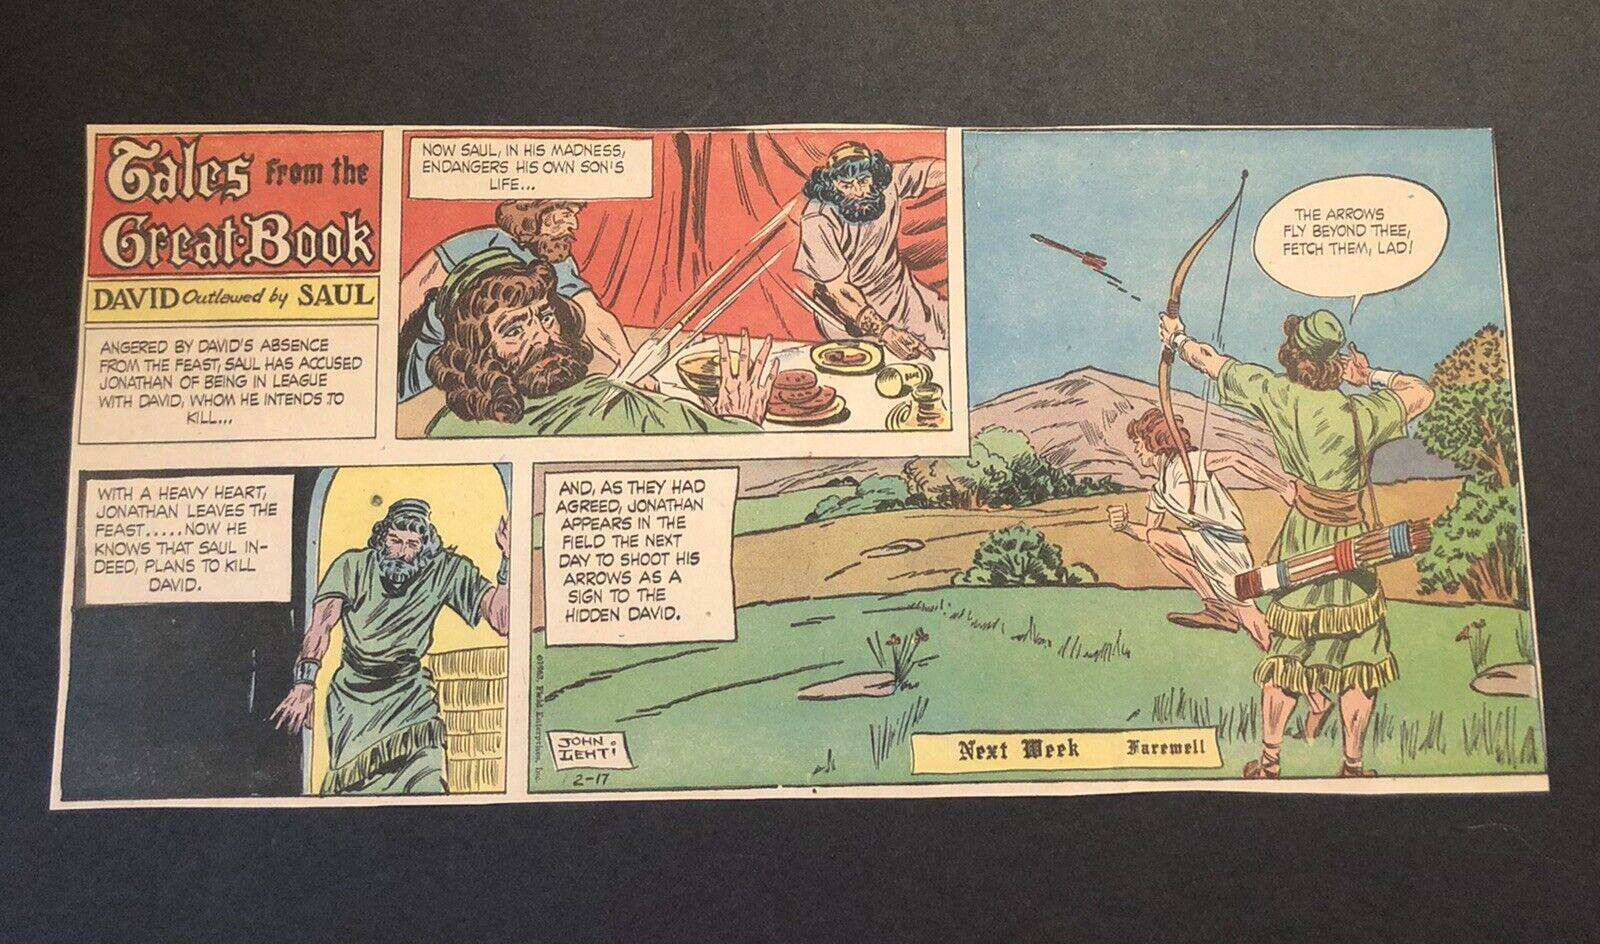 Tales From The Great Book David Outlawed By Saul Newspaper Comic 2-17-63